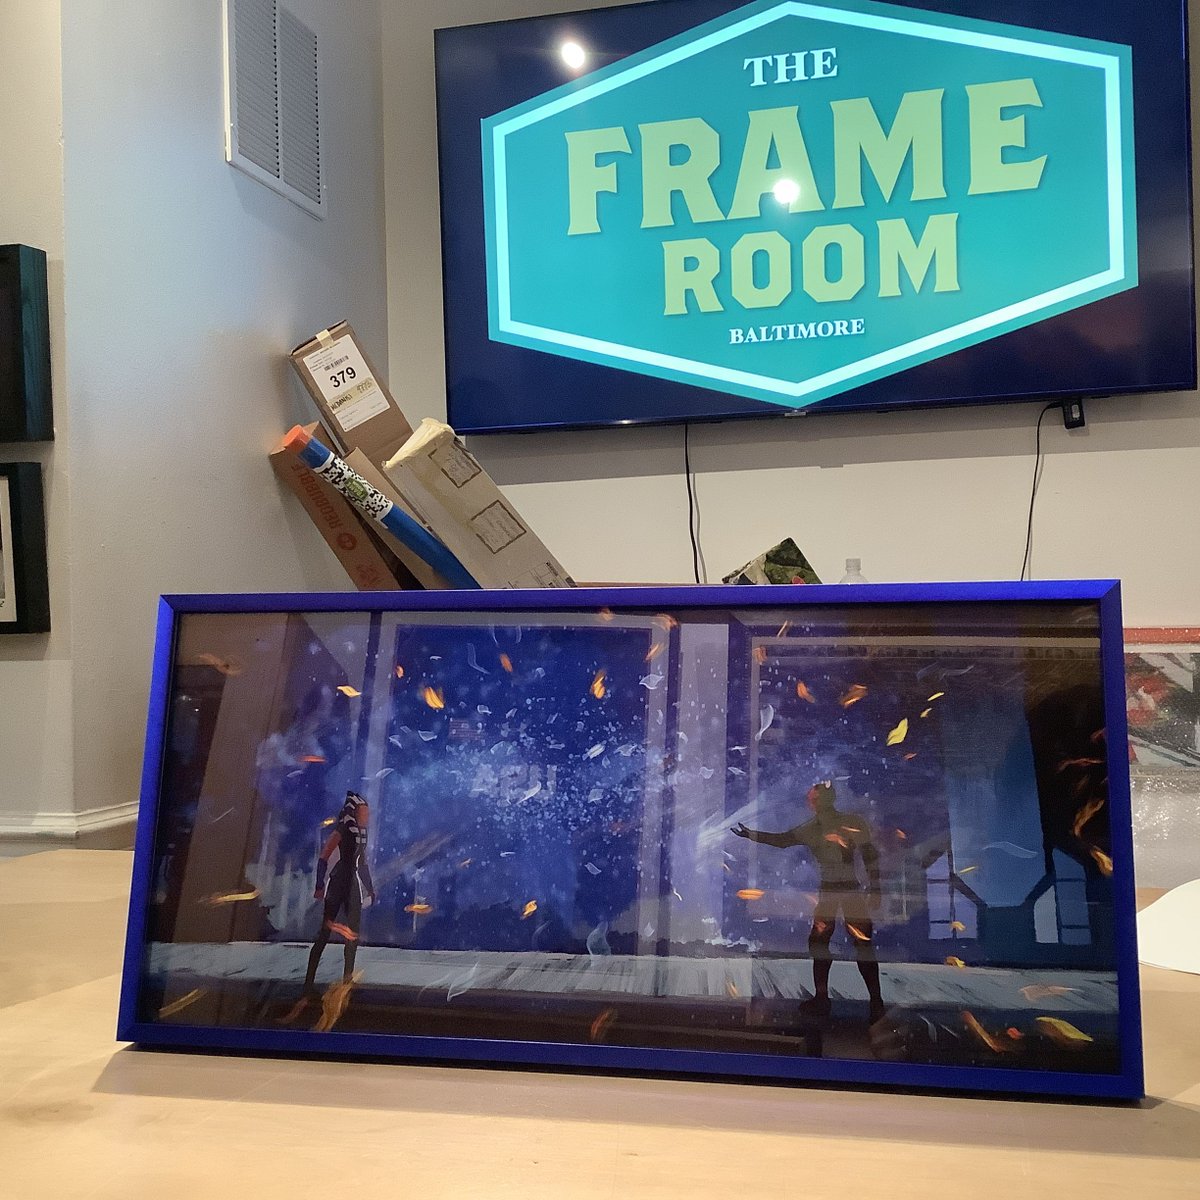 No need to fight for a slot! It's first-come first-serve!

#theframeroom #customframes #customframing #customframer #customframeshop #frameshop #fellspoint #baltimore #star #wars #ahsoka #darth #maul